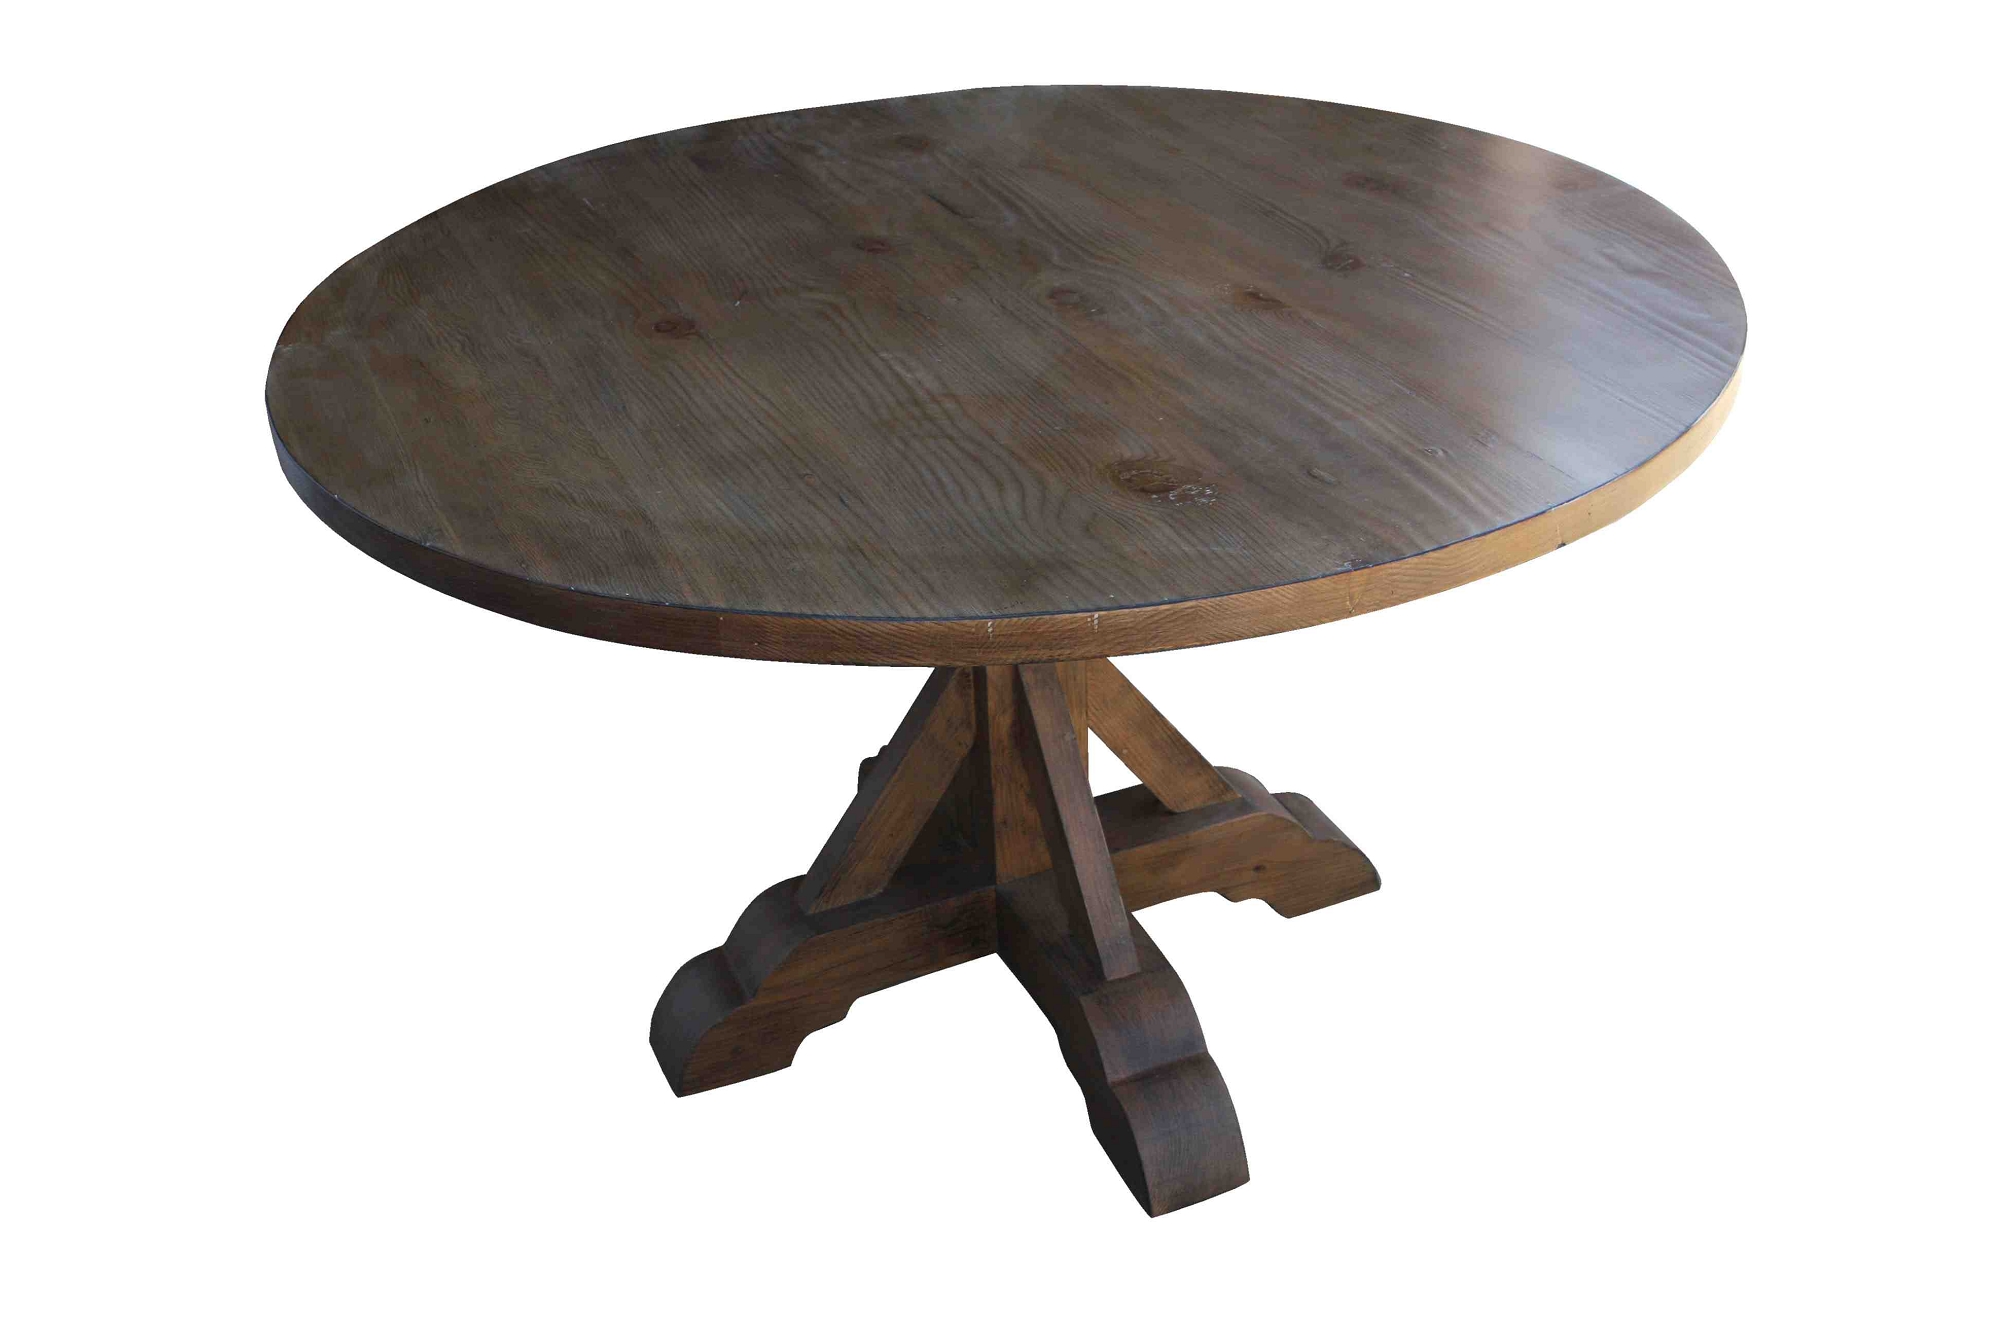 2000x1333px 7 Awesome Reclaimed Wood Round Dining Tables Picture in Furniture